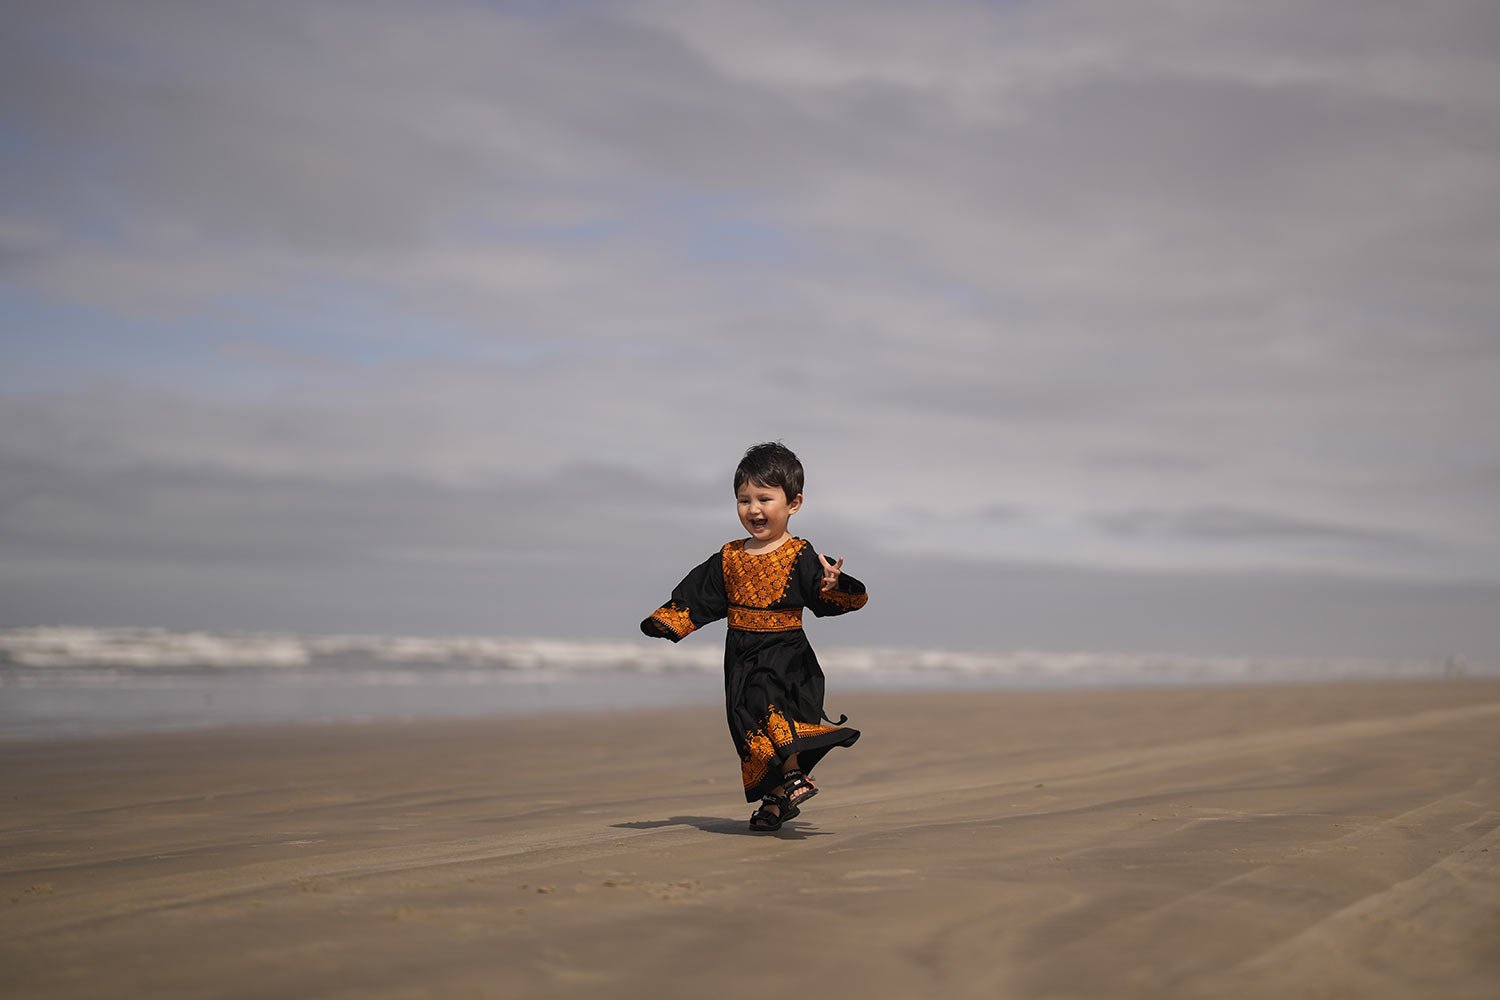  Two-year-old Afghan refugee Farnia Hassani plays on the beach in Praia Grande, Sao Paulo state, Brazil, Aug. 15, 2023. Afghan refugees continue to arrive in Brazil with government-authorized temporary visas and residences issued for humanitarian rea